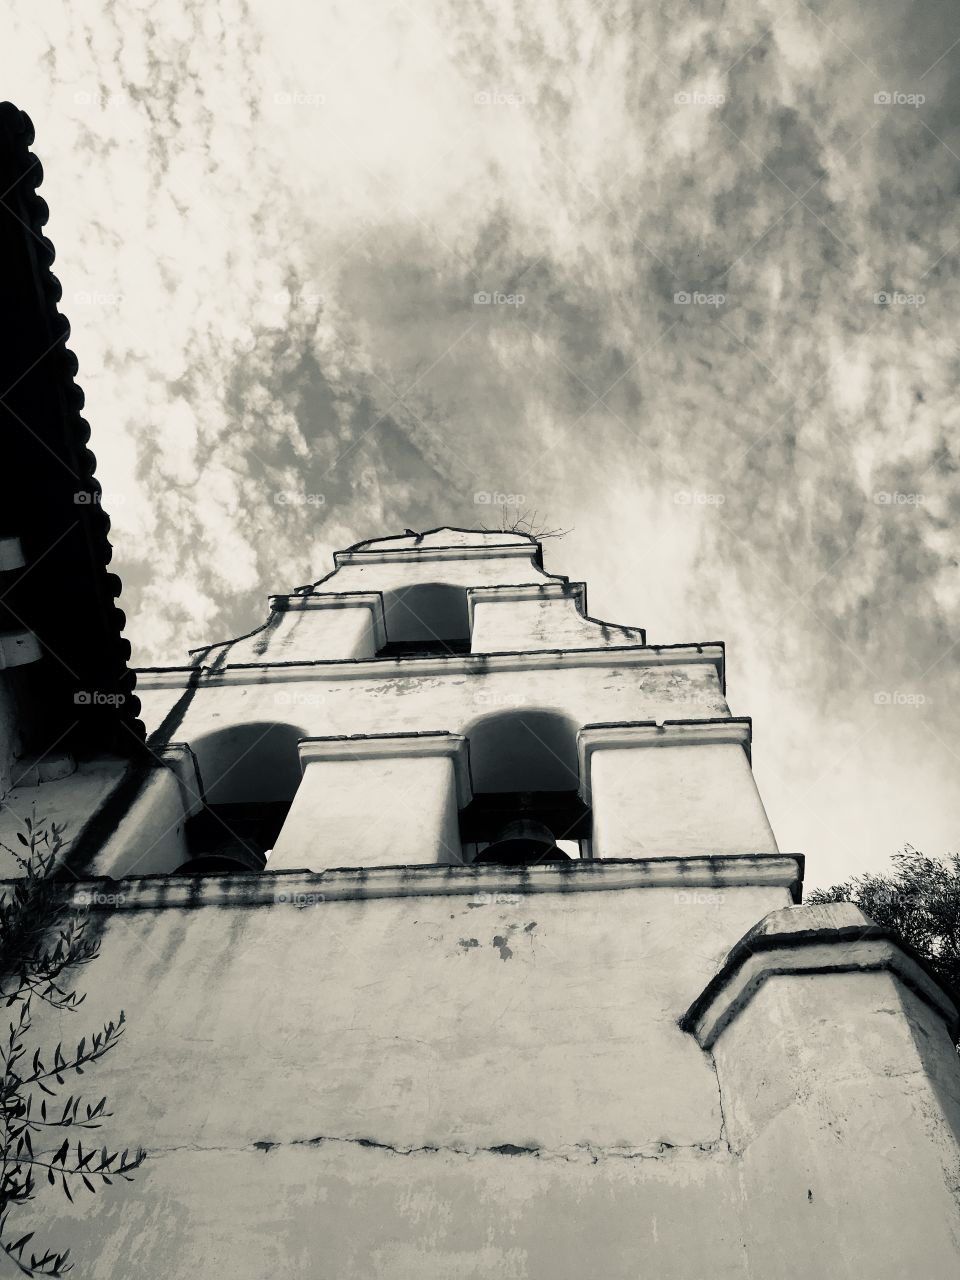 The impressive and haunting bell tower at Old Mission San Juan Batista reaches for the stark storm clouds above.